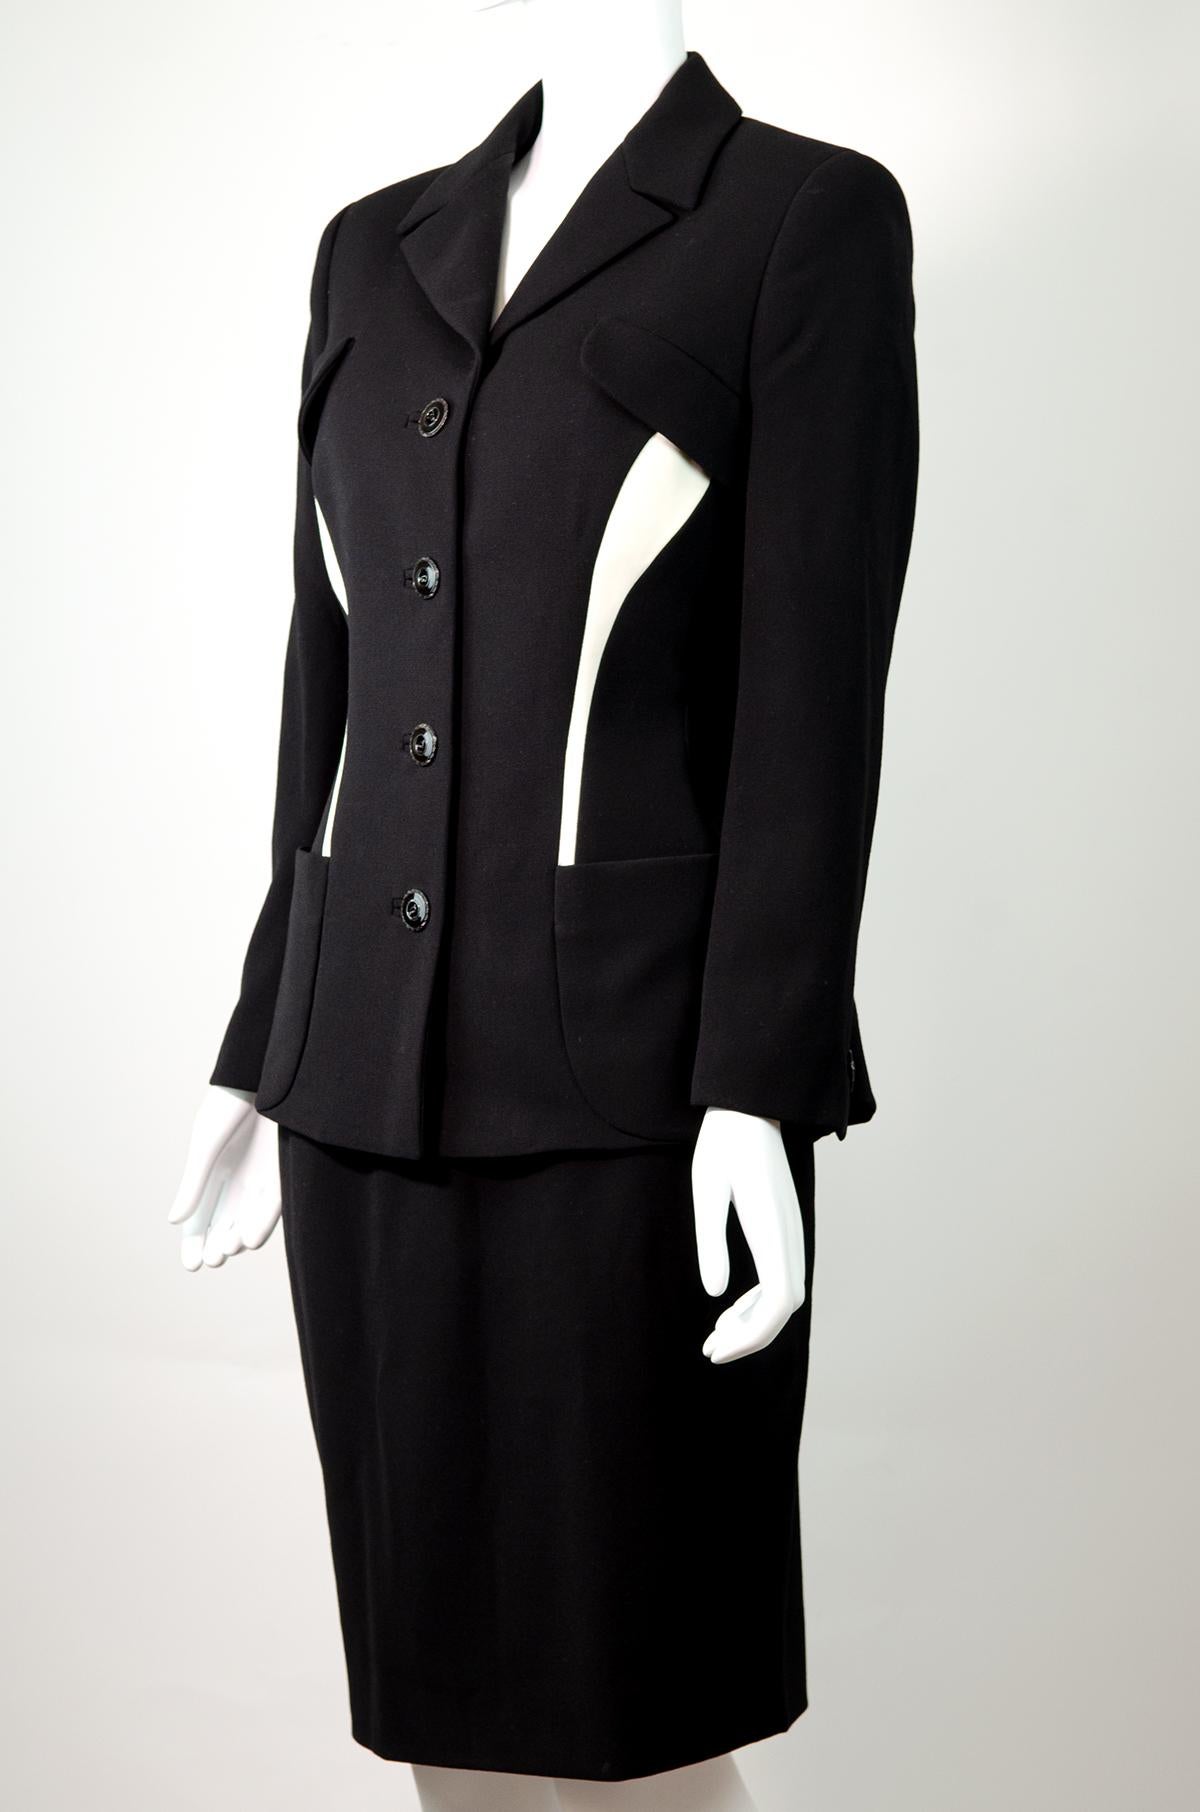 VERSACE Vintage 1997 Contour Skirt Suit

Brand: Versace Couture

Designer: Gianni Versace

Collection / Year: 1997

Fabric: Wool 

Color: Black / White

Size: IT42

The ultimate power suit. This vintage suit is made from a black wool and features